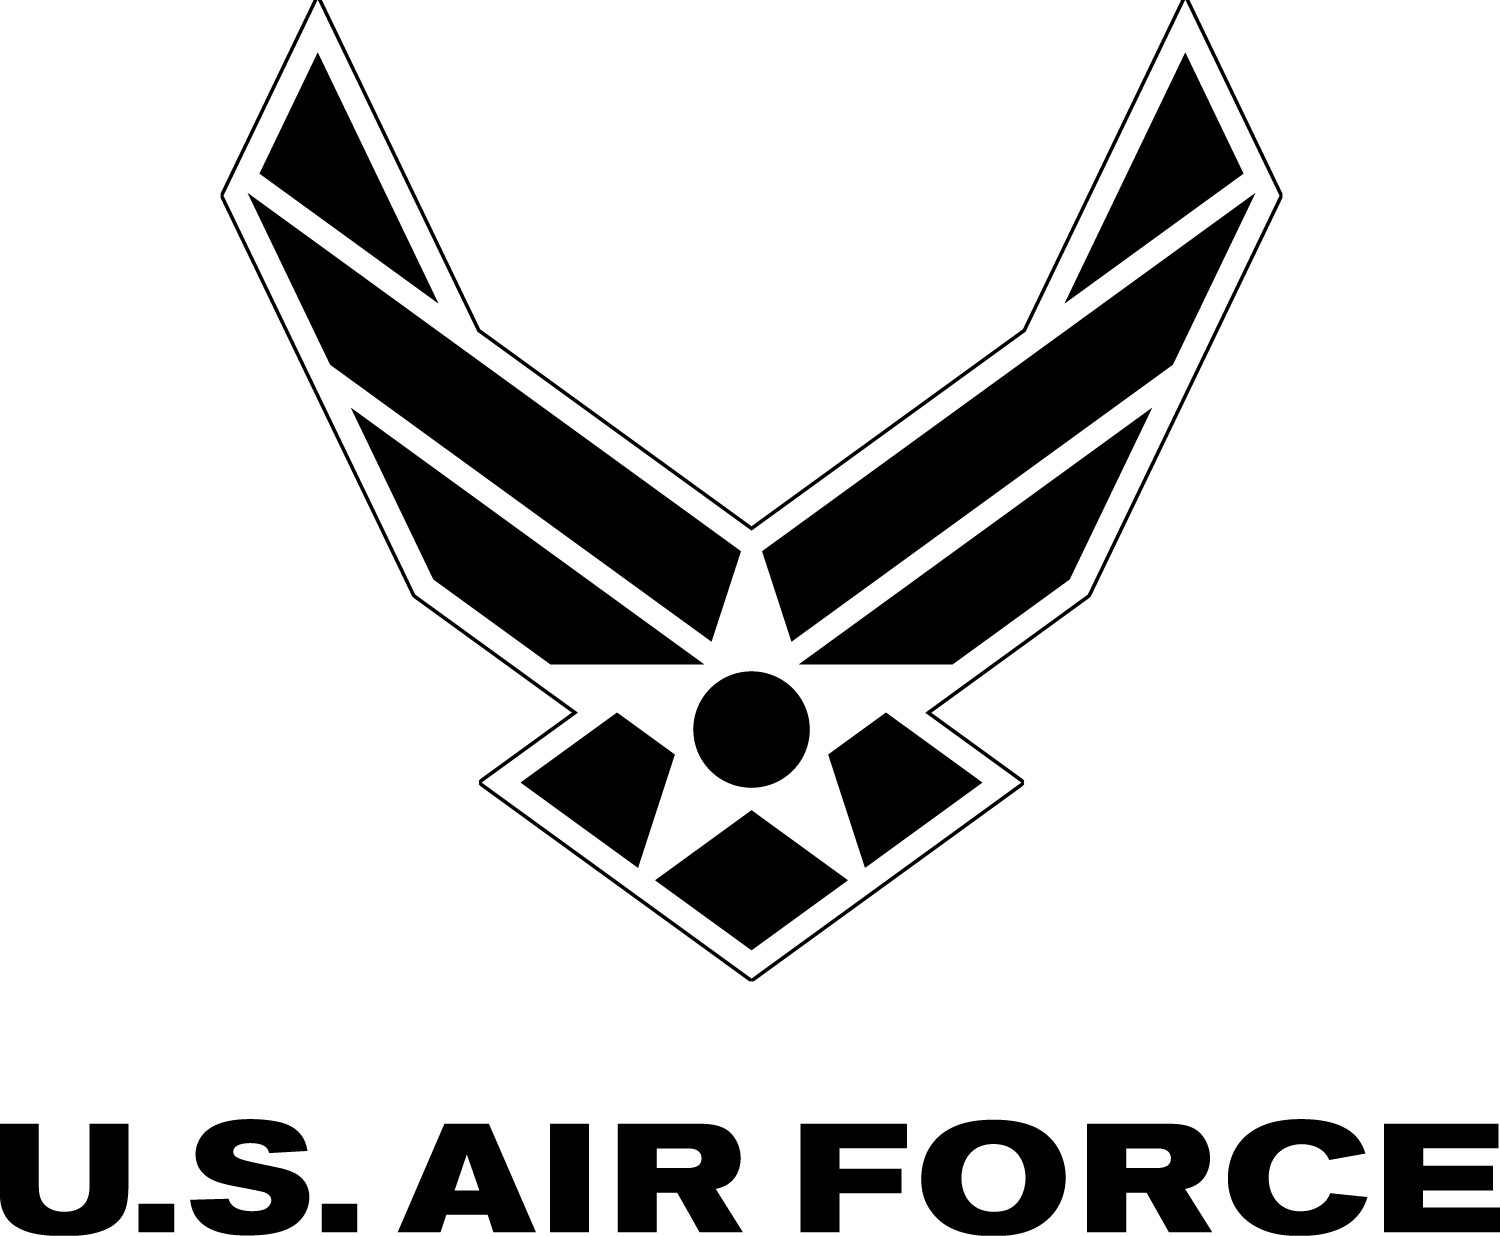 Air Force symbol with logotype, black with white outline